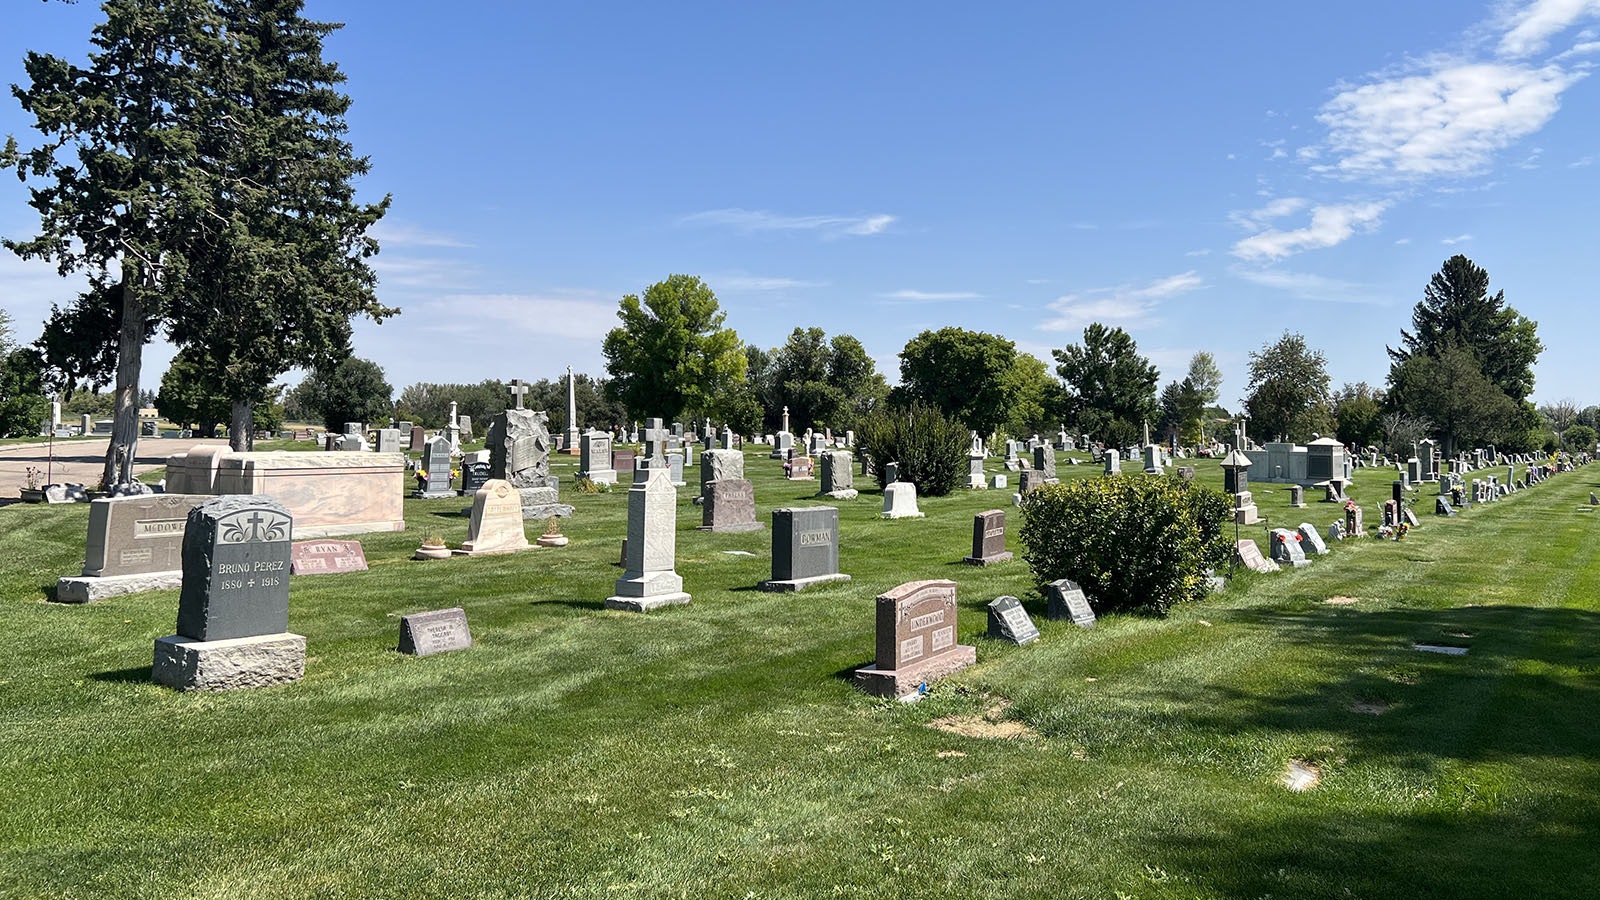 Rows and rows of headstones and monuments at Mount Olivet Cemetery in Cheyenne.